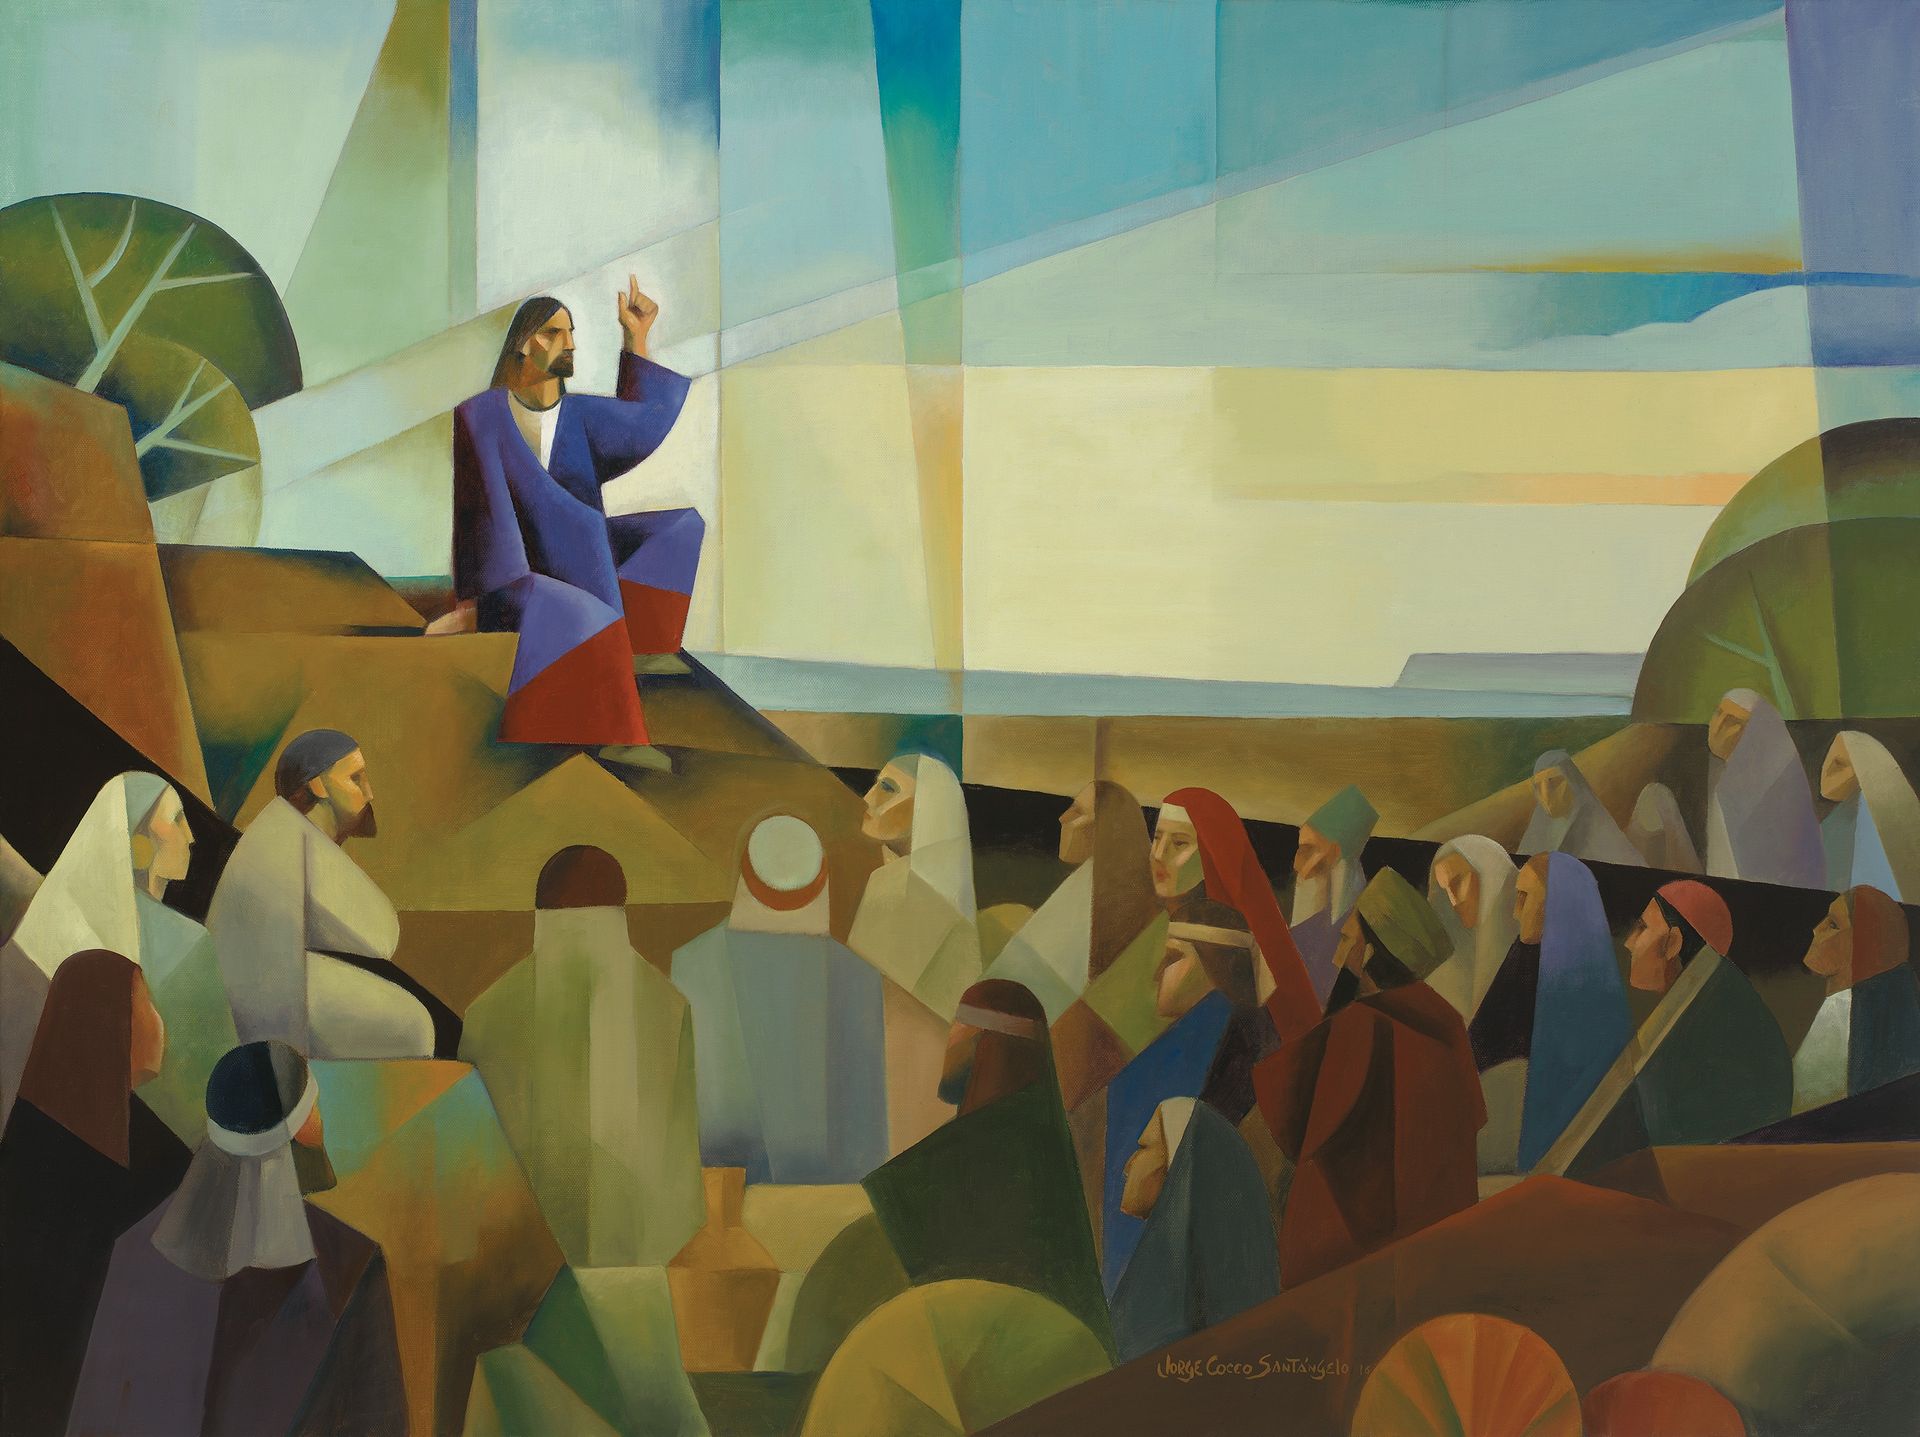 Sermon on the Mount, by Jorge Cocco.